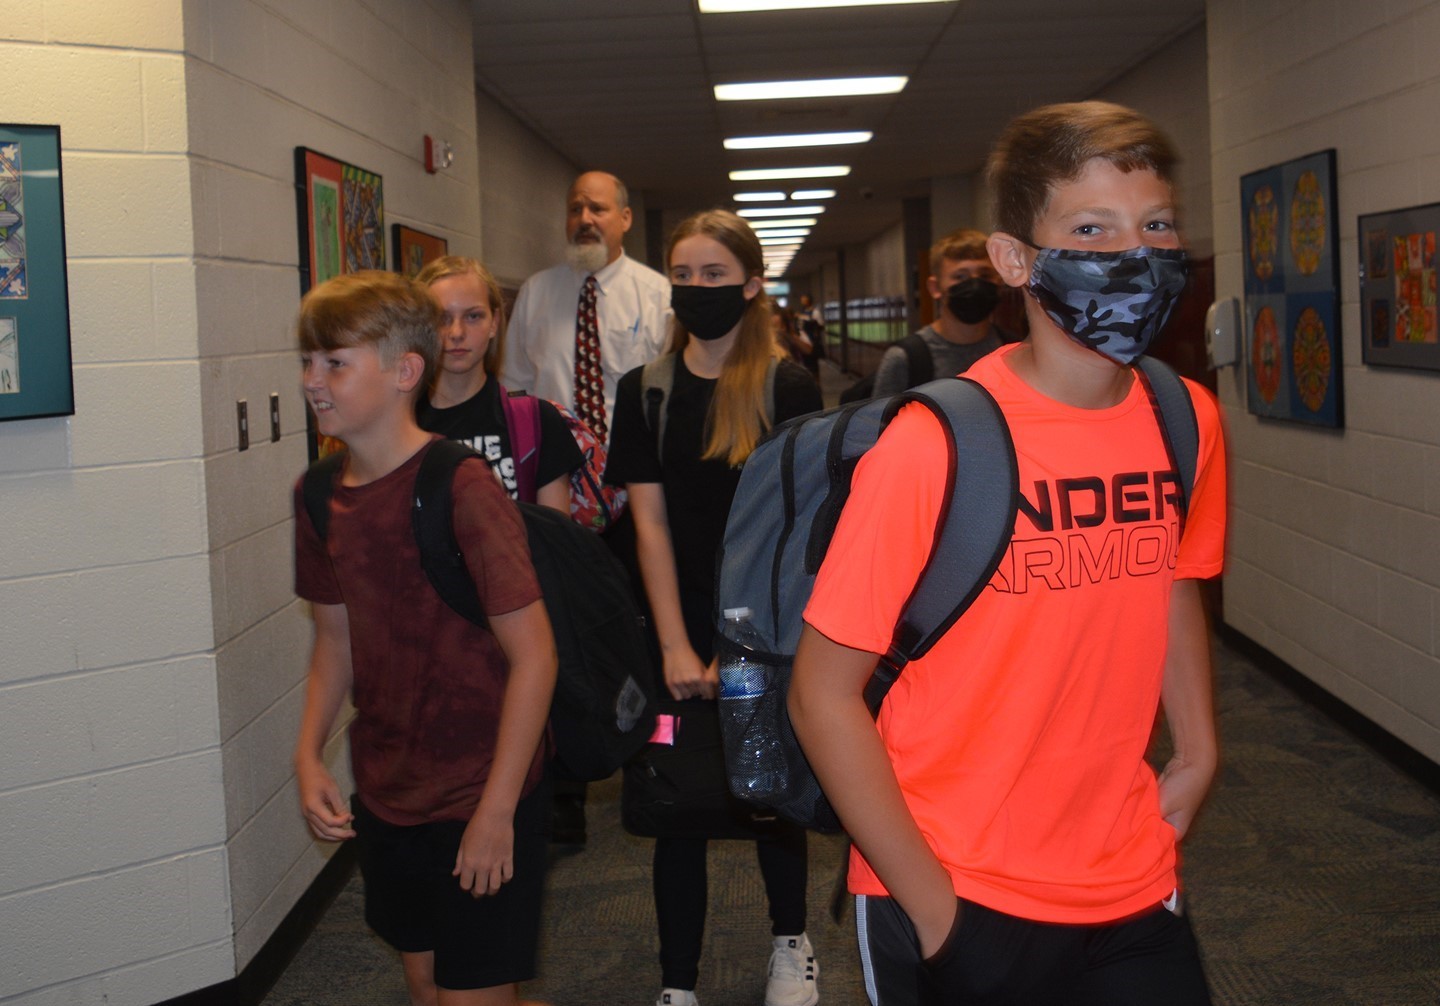 Students changing classes in the Middle School hallway.